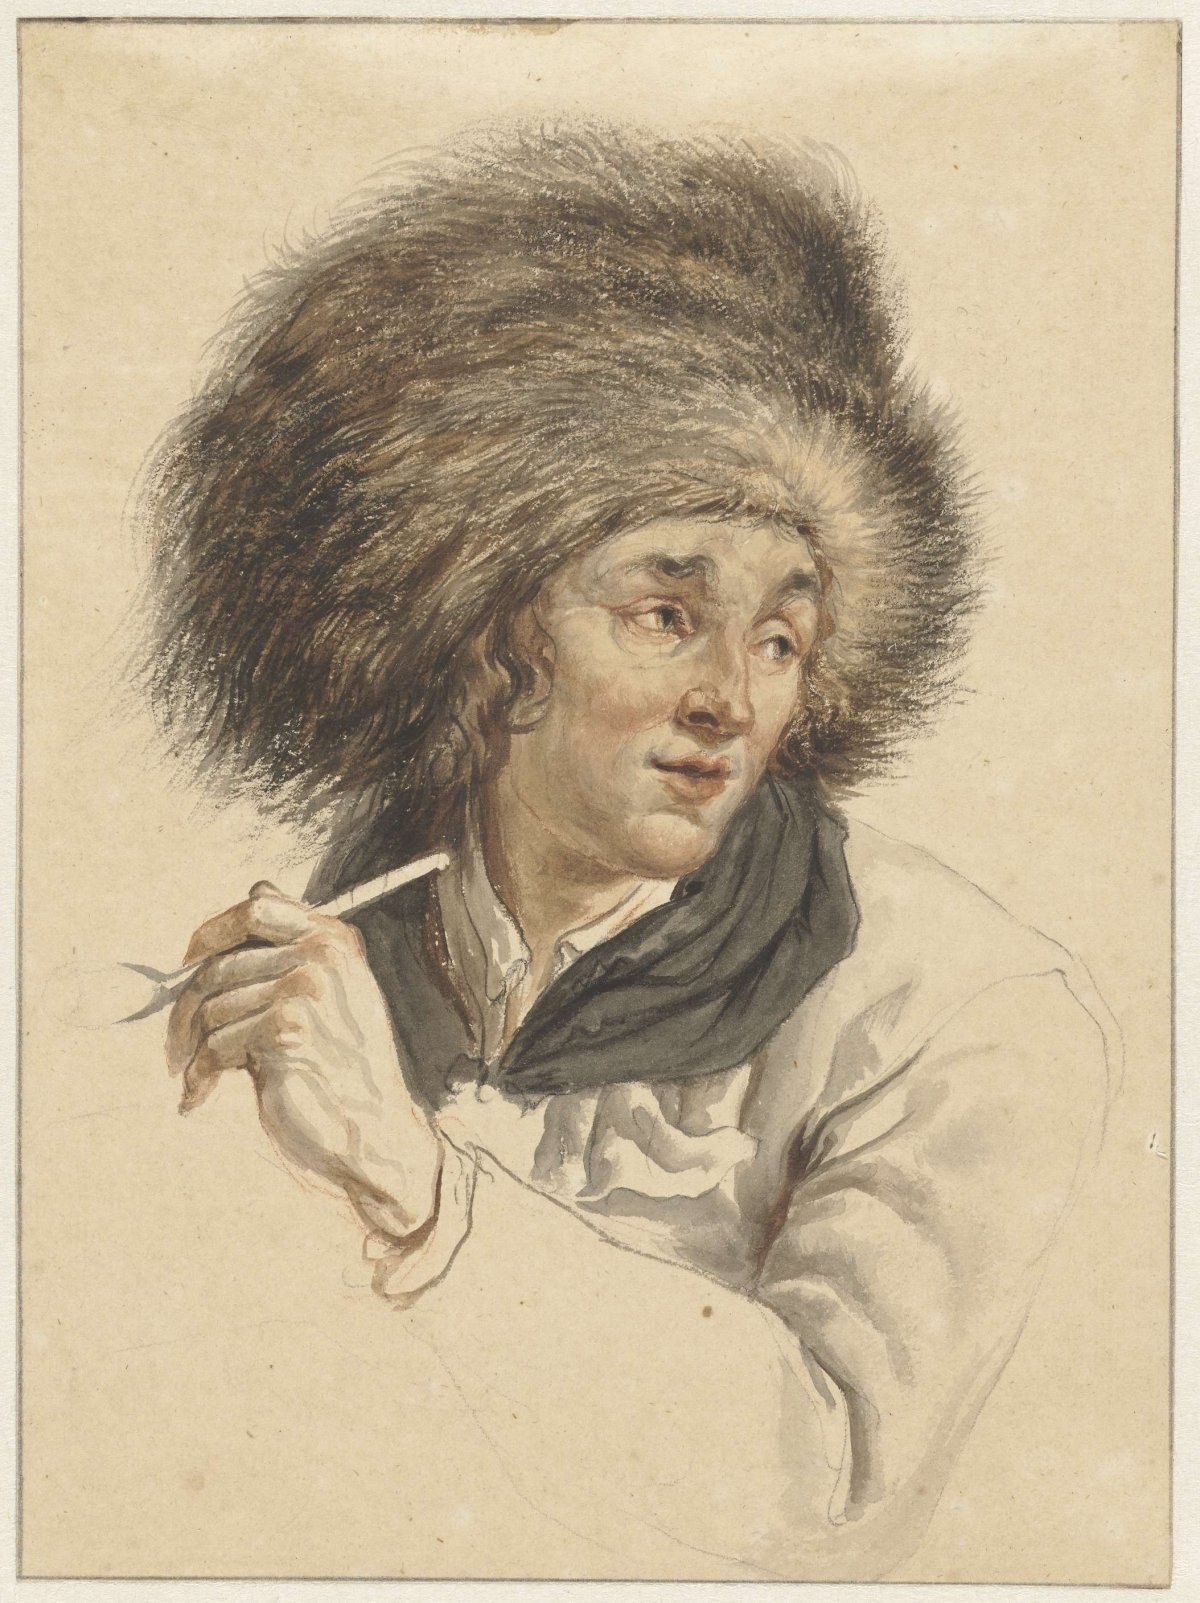 Man with Fur Hat and Pipe, Abraham van Strij (I), 1763 - 1826